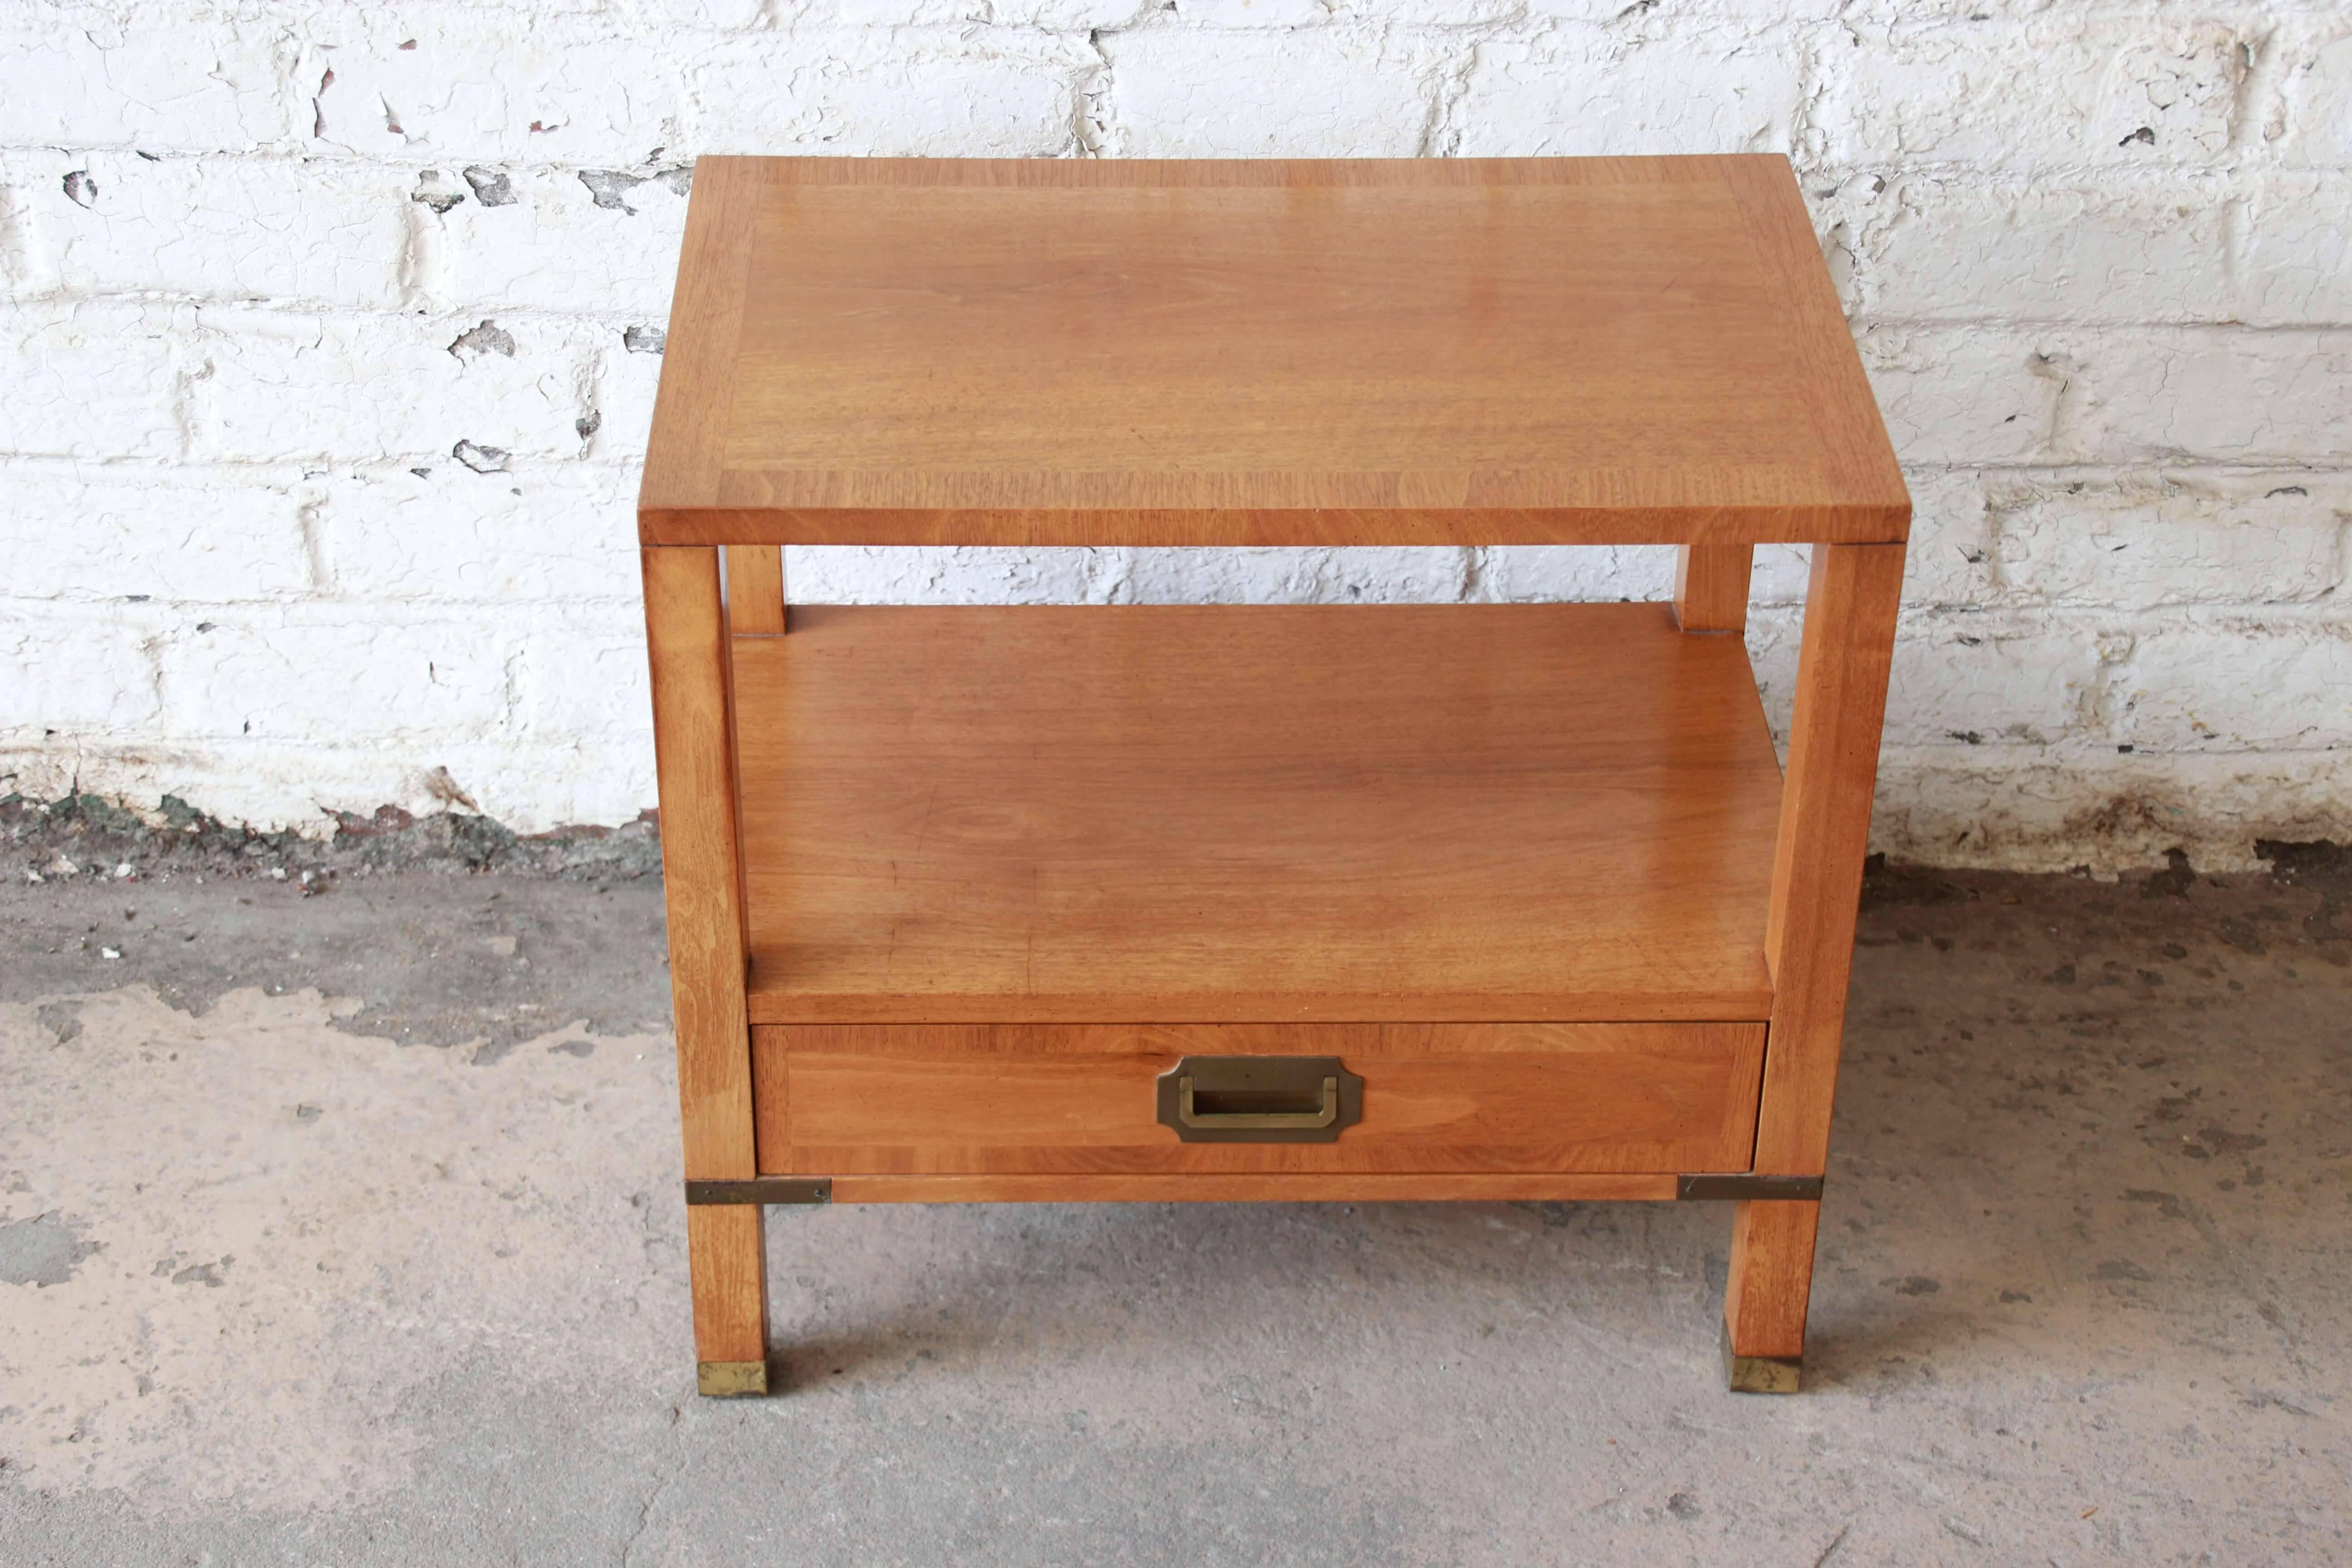 Offering a very nice Baker Furniture Milling Road midcentury campaign style nightstand or end table. The stand has brass hardware and decor in a modern version of this style. There are two tiers for storage with a drawer below. The piece is in good